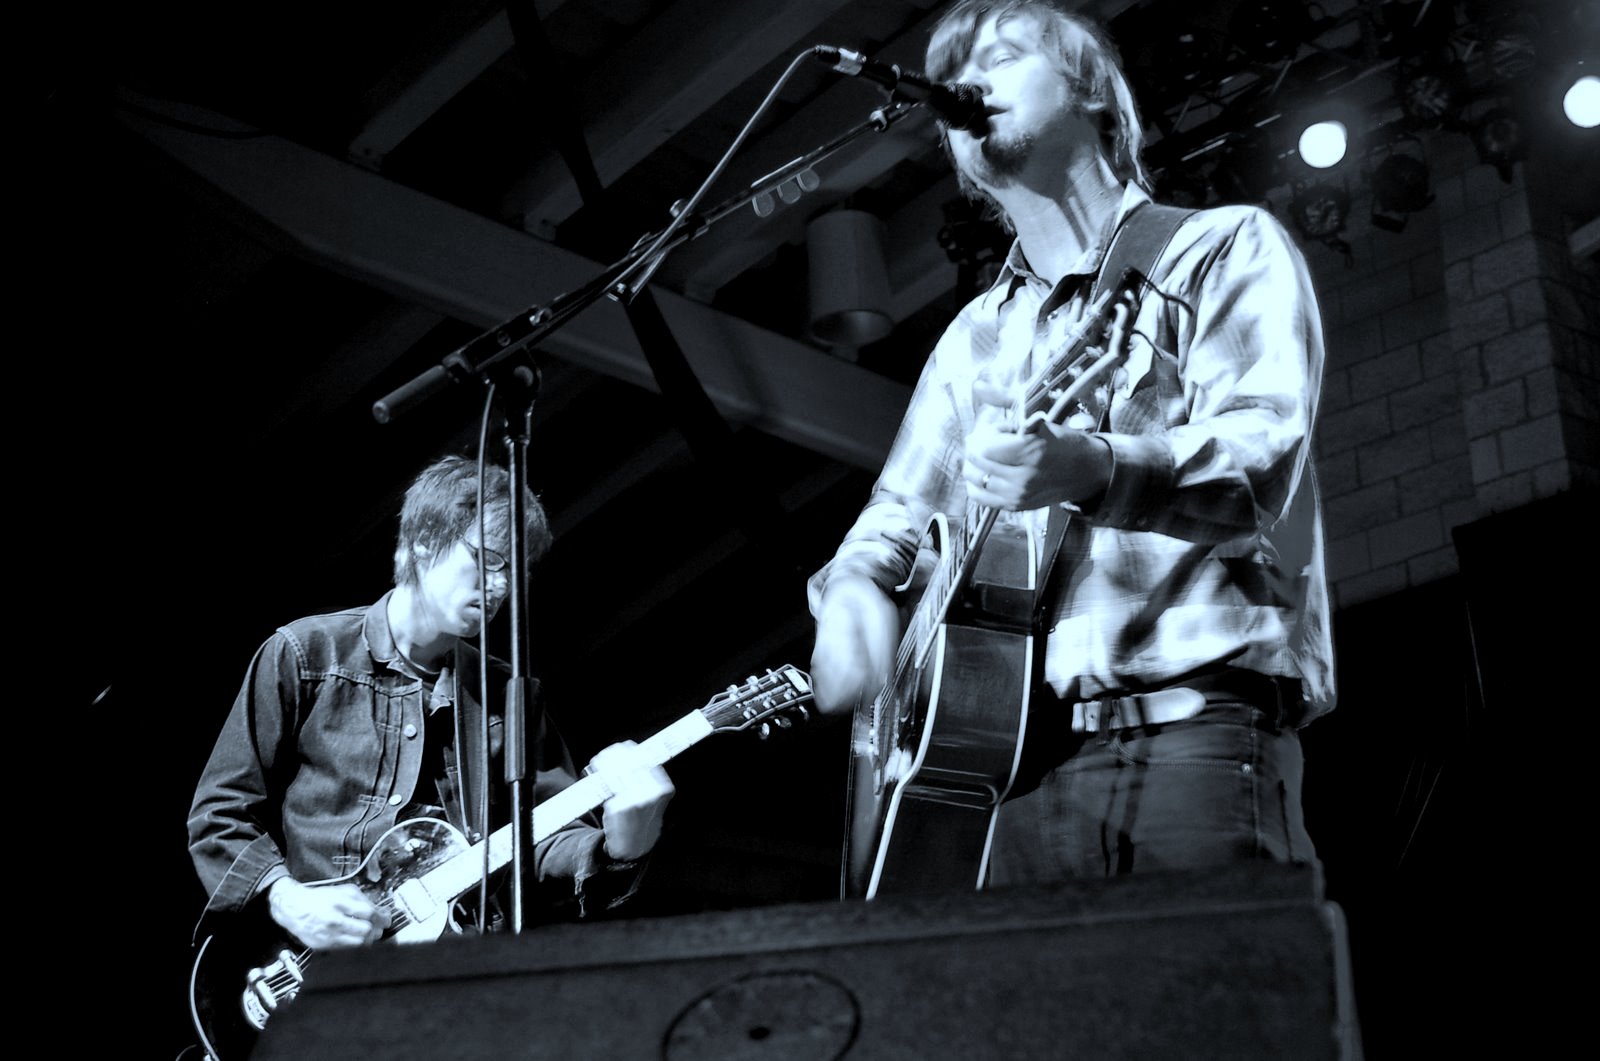 Review - Son Volt at Summerfest, July 7th, 2007